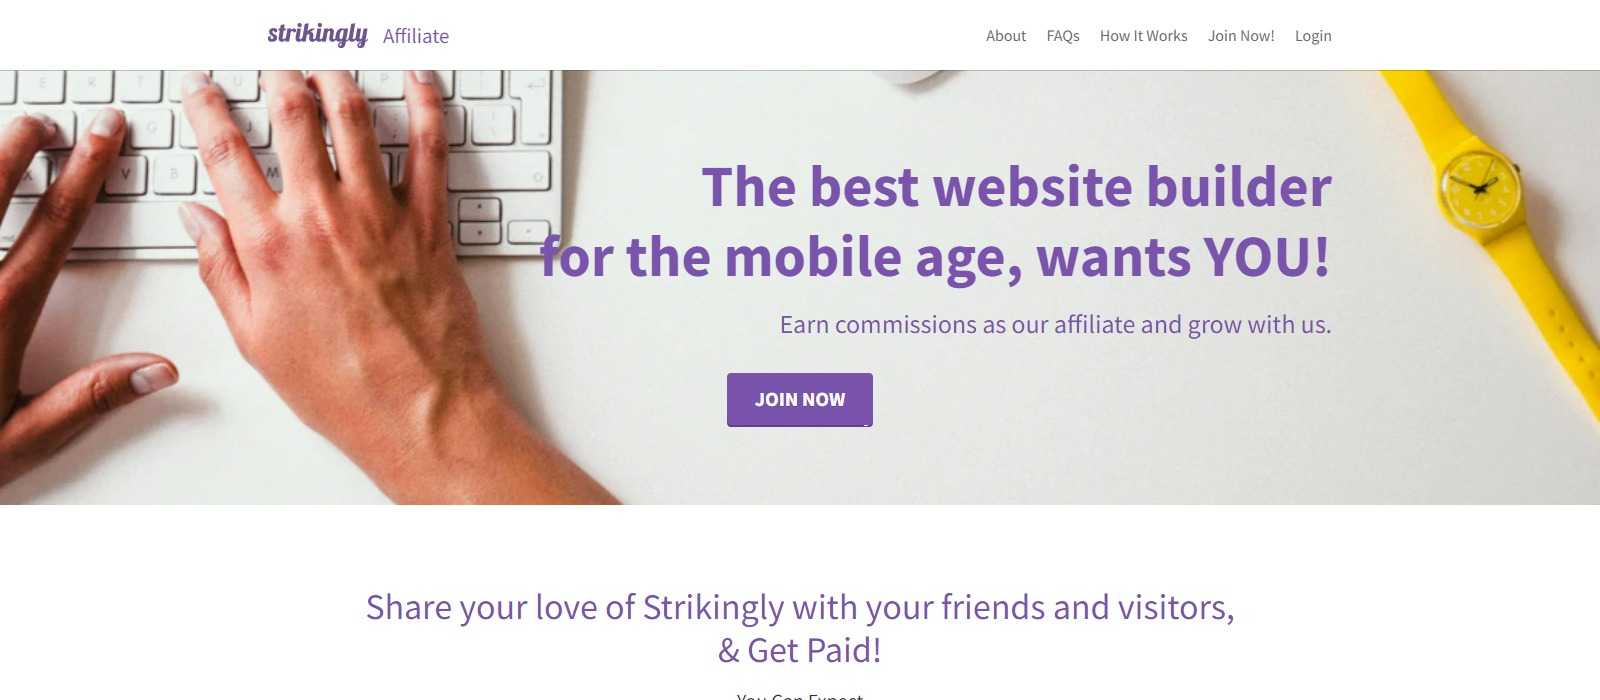 Strikingly Affiliates Program Review: Earn Up To 30% Commission per Sale